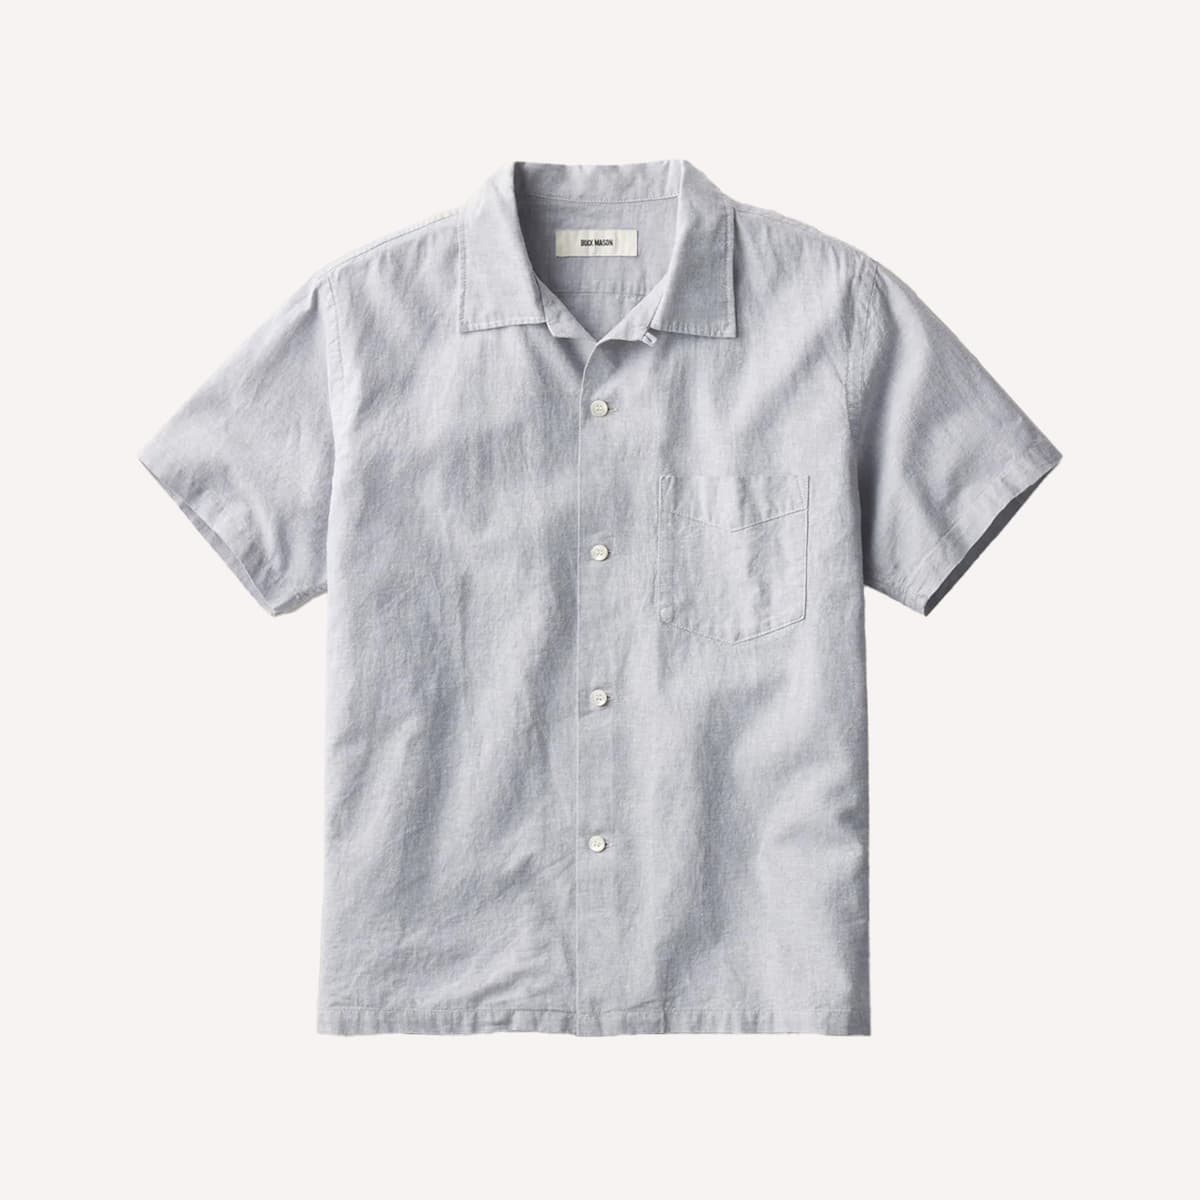 Buy Iconic Textured Resort Shirt with Short Sleeves and Camp